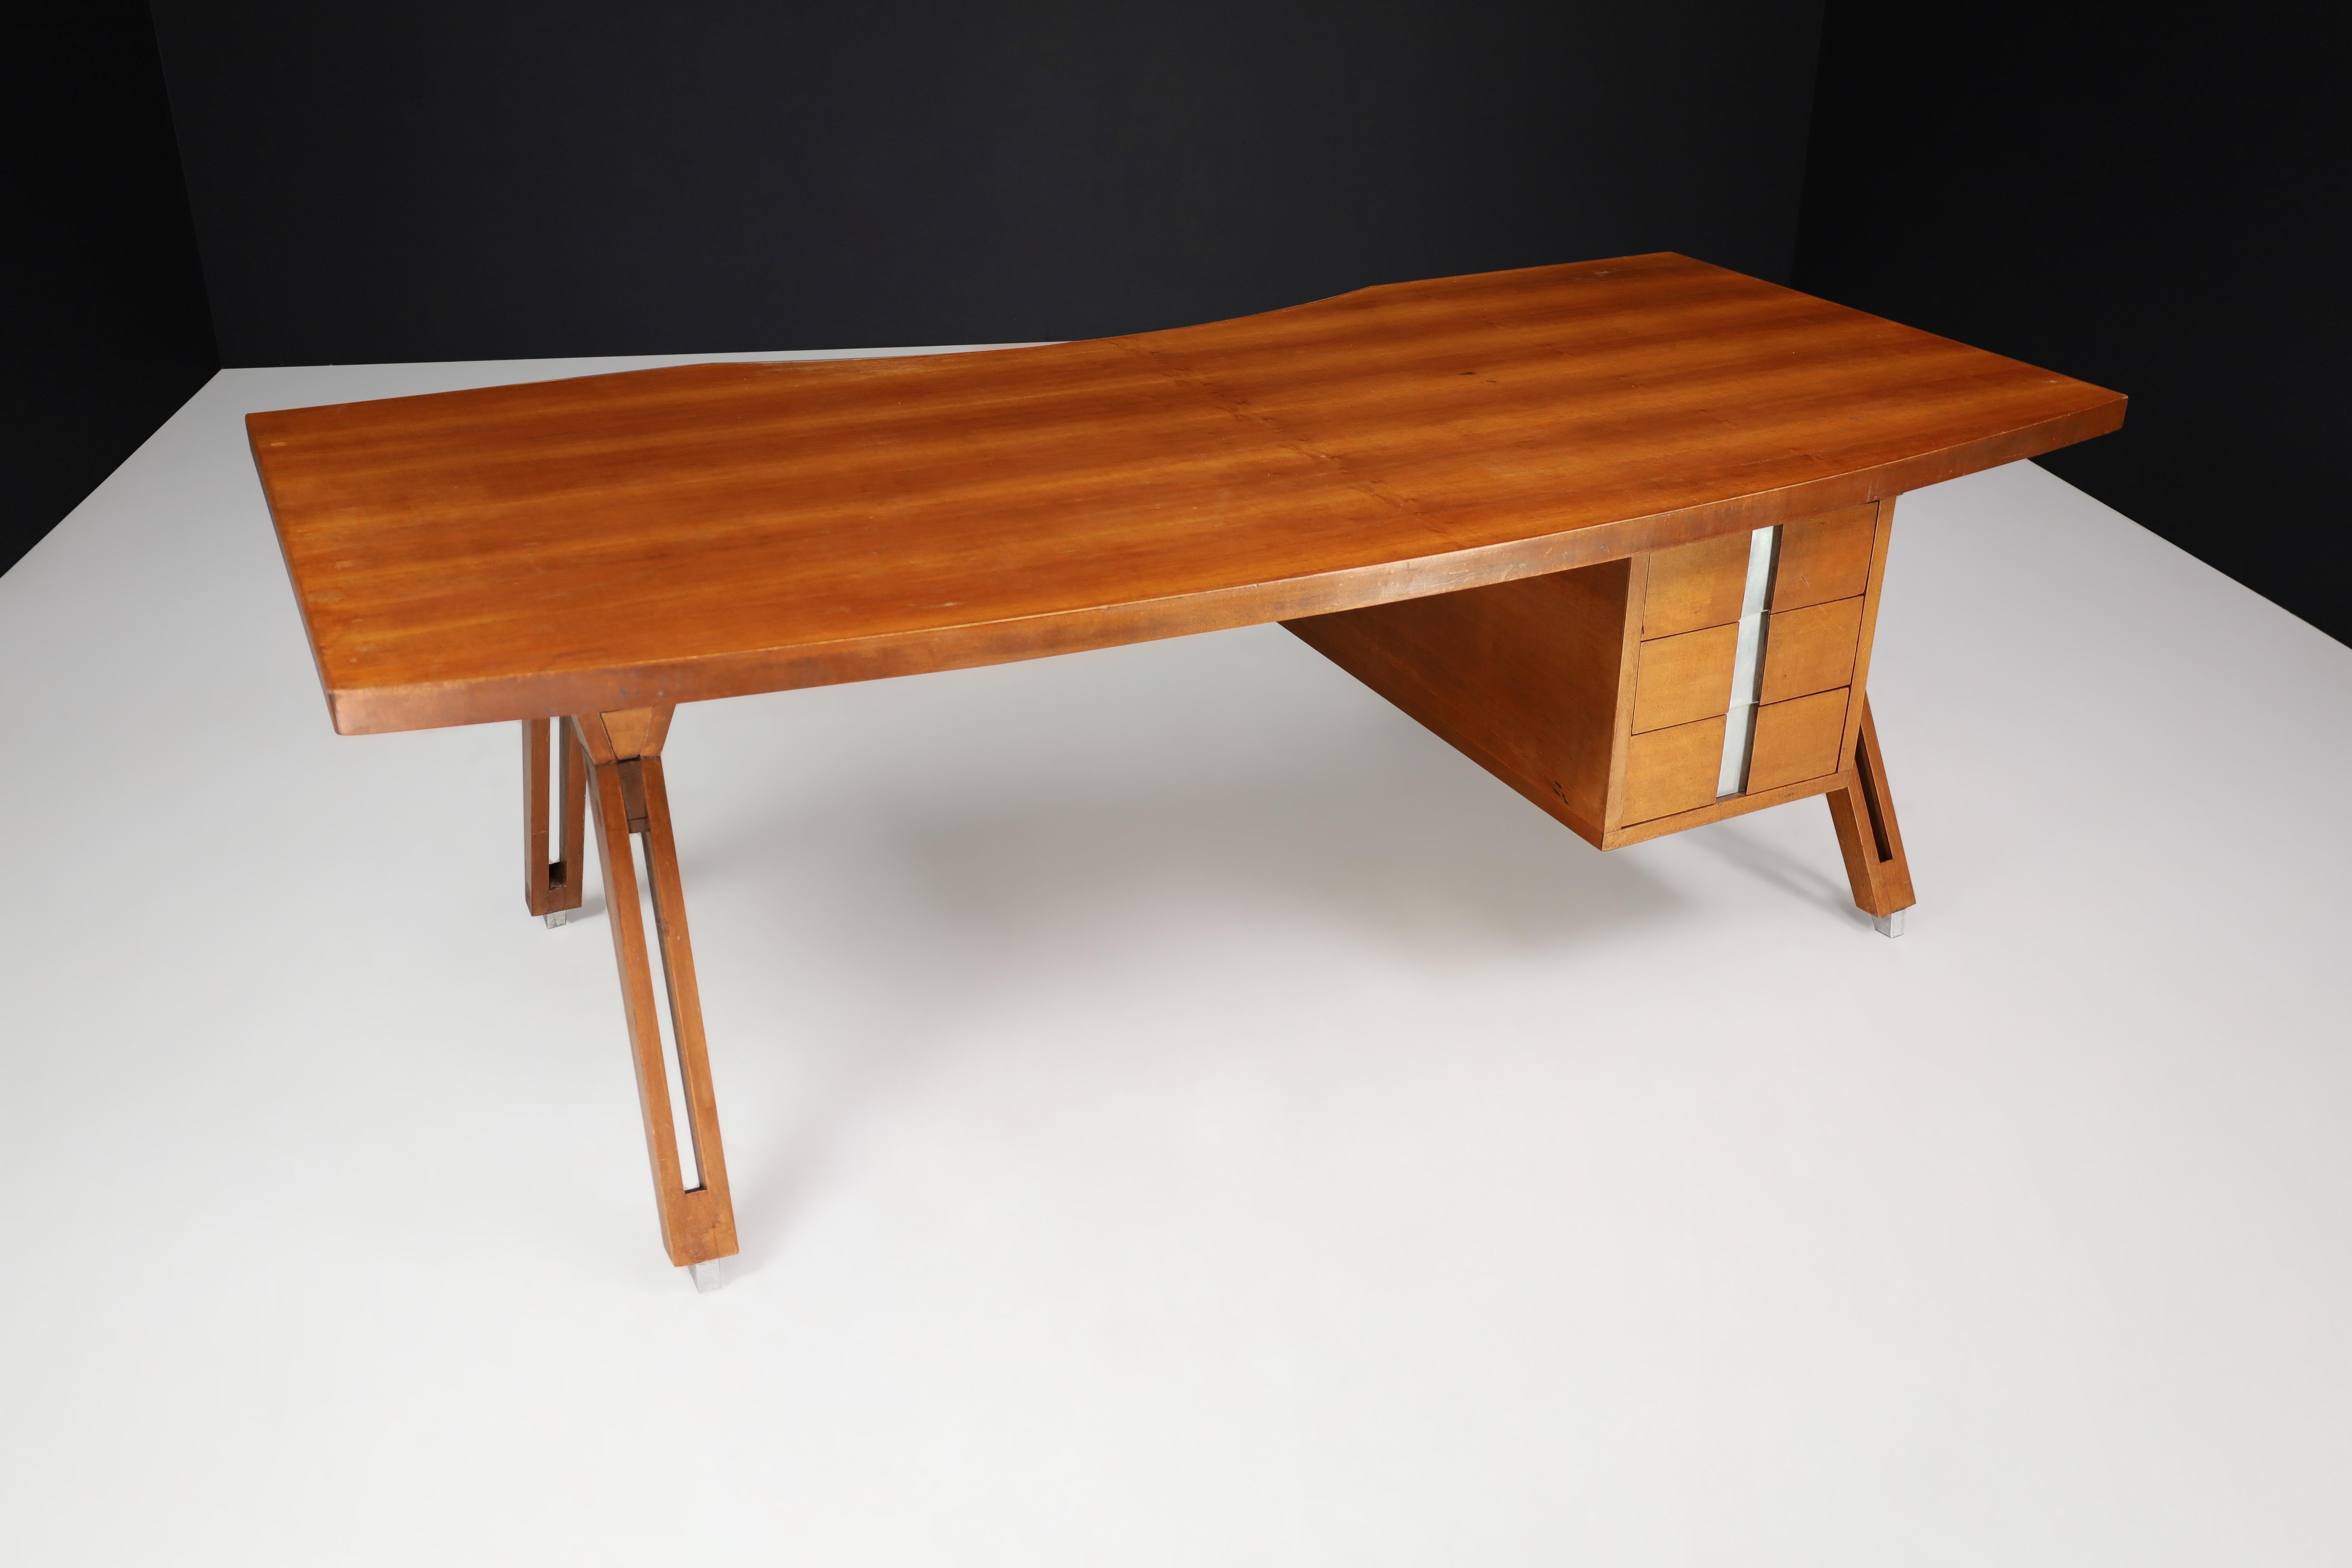 Ico Parisi For MIM Roma Executive Desk, Italy, 1950s.

Executive Desk Designed By Ico Parisi For MIM Roma Italy 1950s. A lovely 1950 presidential desk. Modernist, blond polished wood with steel inserts. The desk is in excellent original condition.